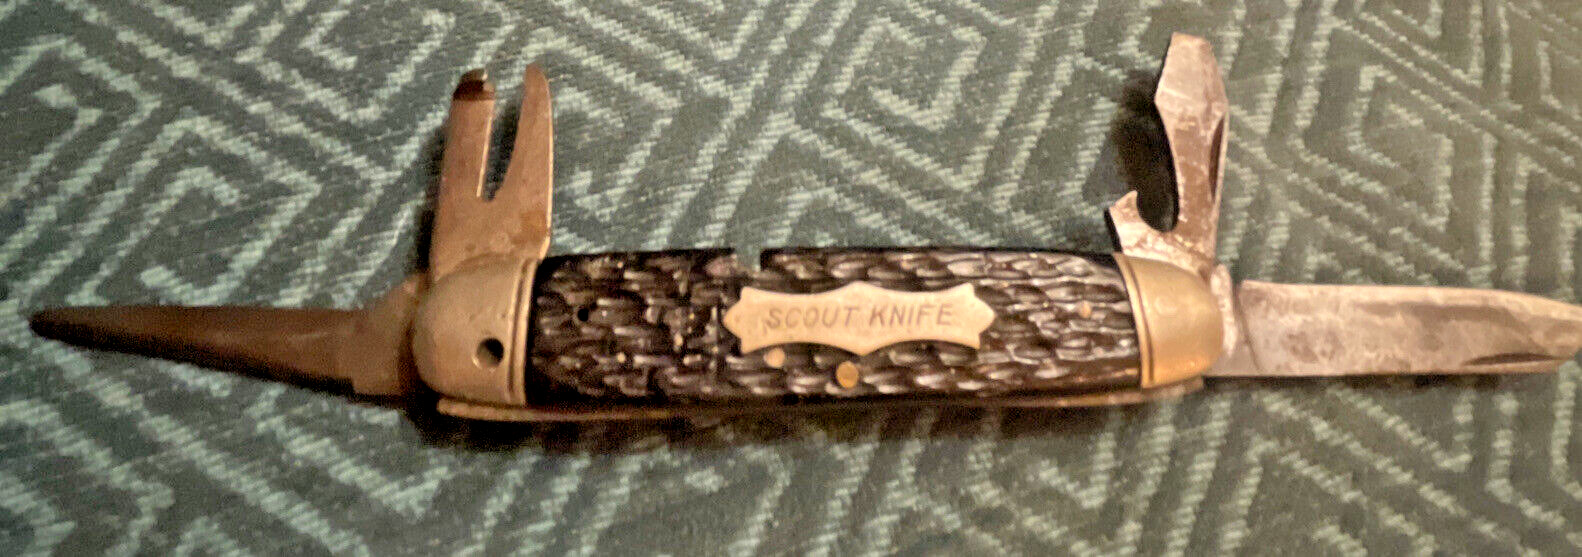 Vintage 1930s-1940s Syracuse Knife Co. 4 Blade Boy Scout Knife With Bail